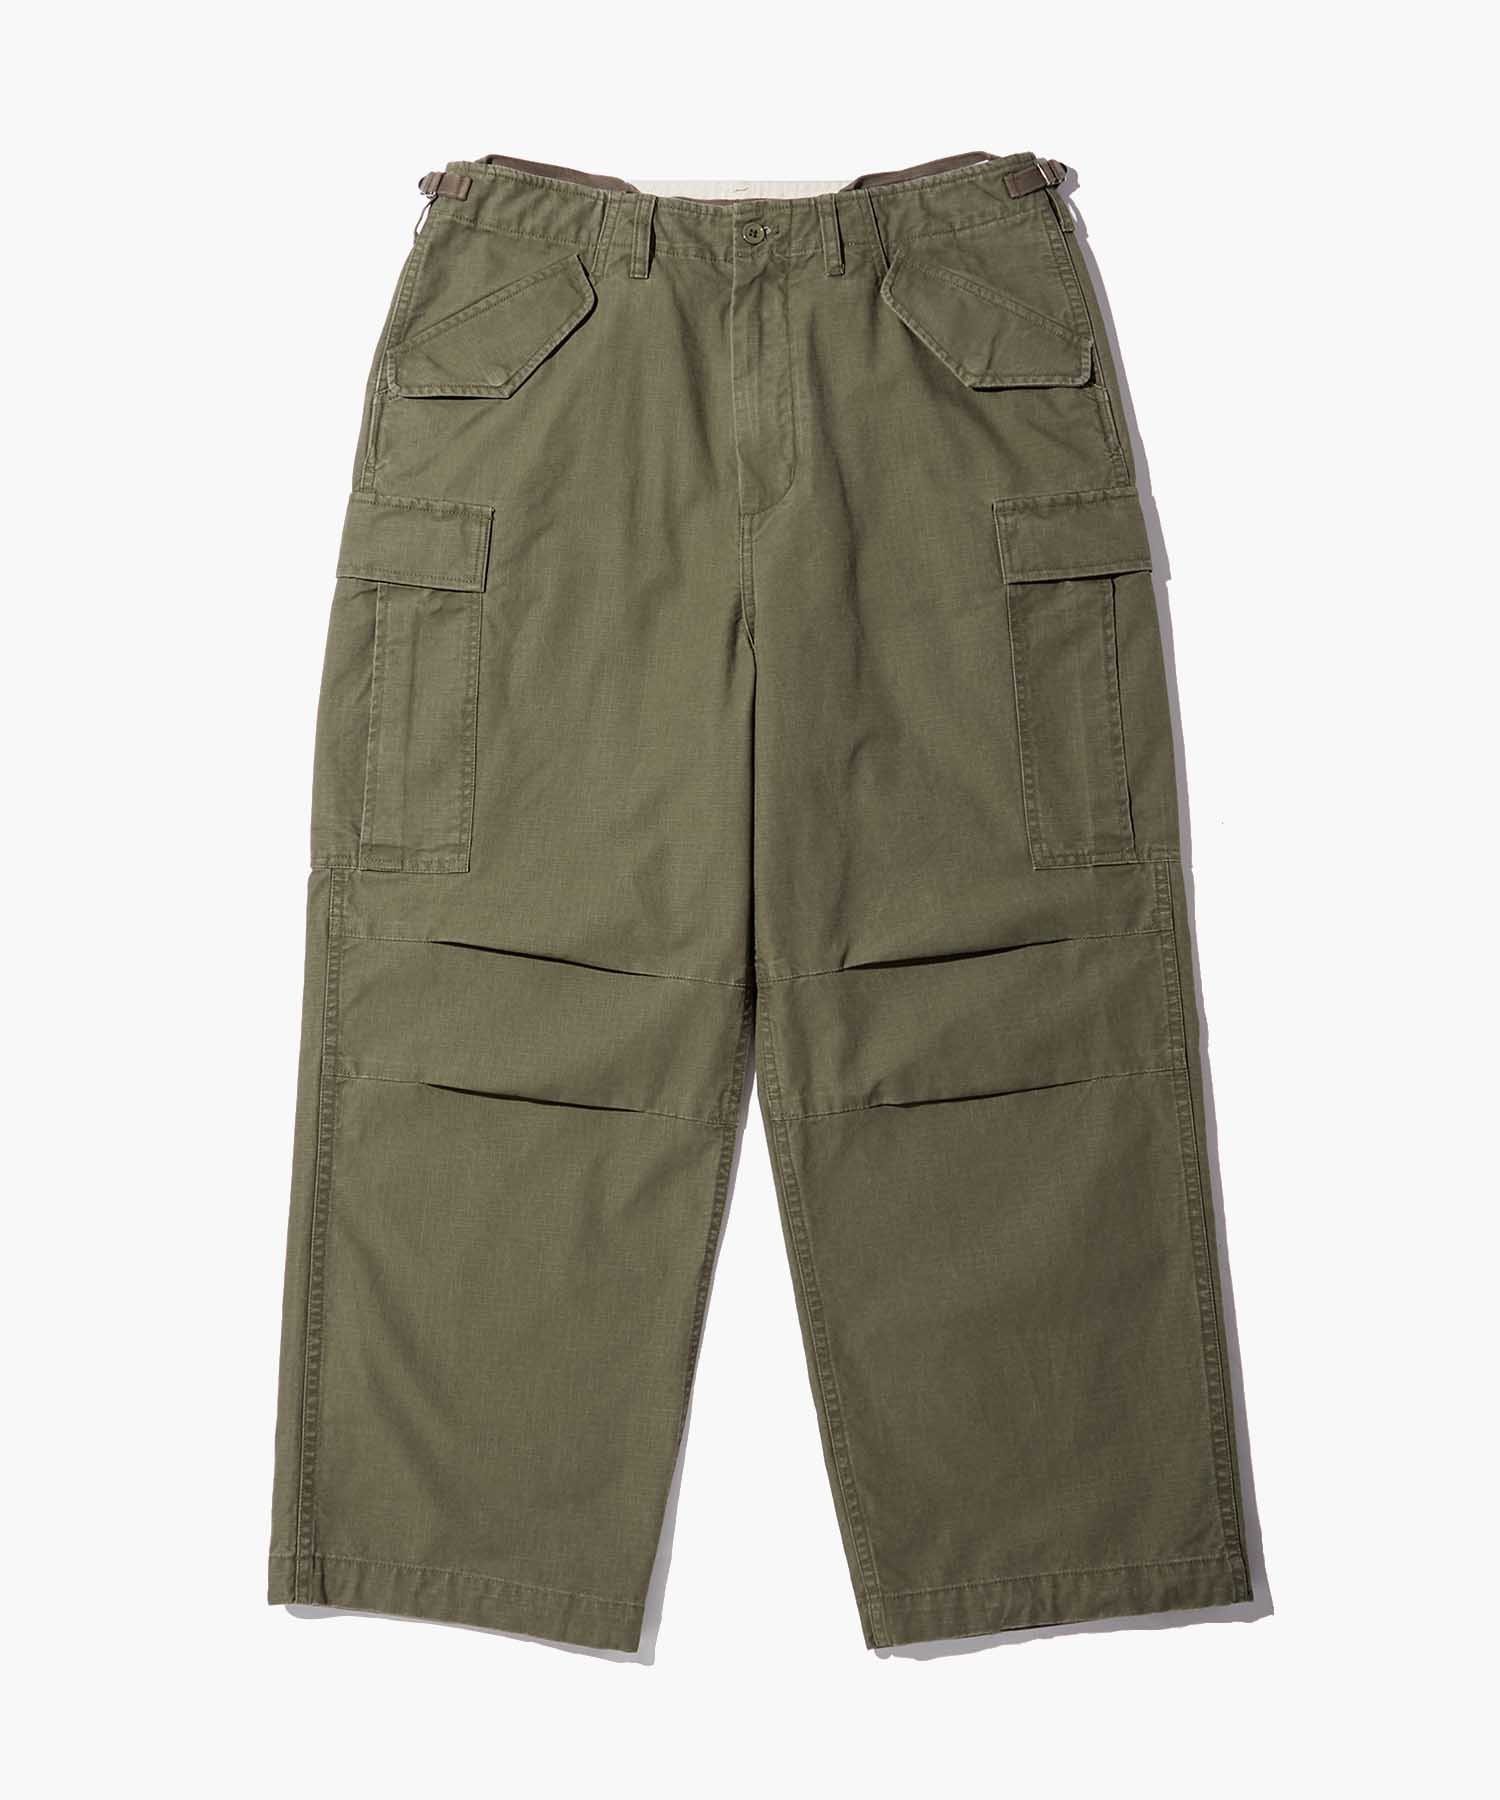 M-65 RIPSTOP CARGO PANTS_OLIVE